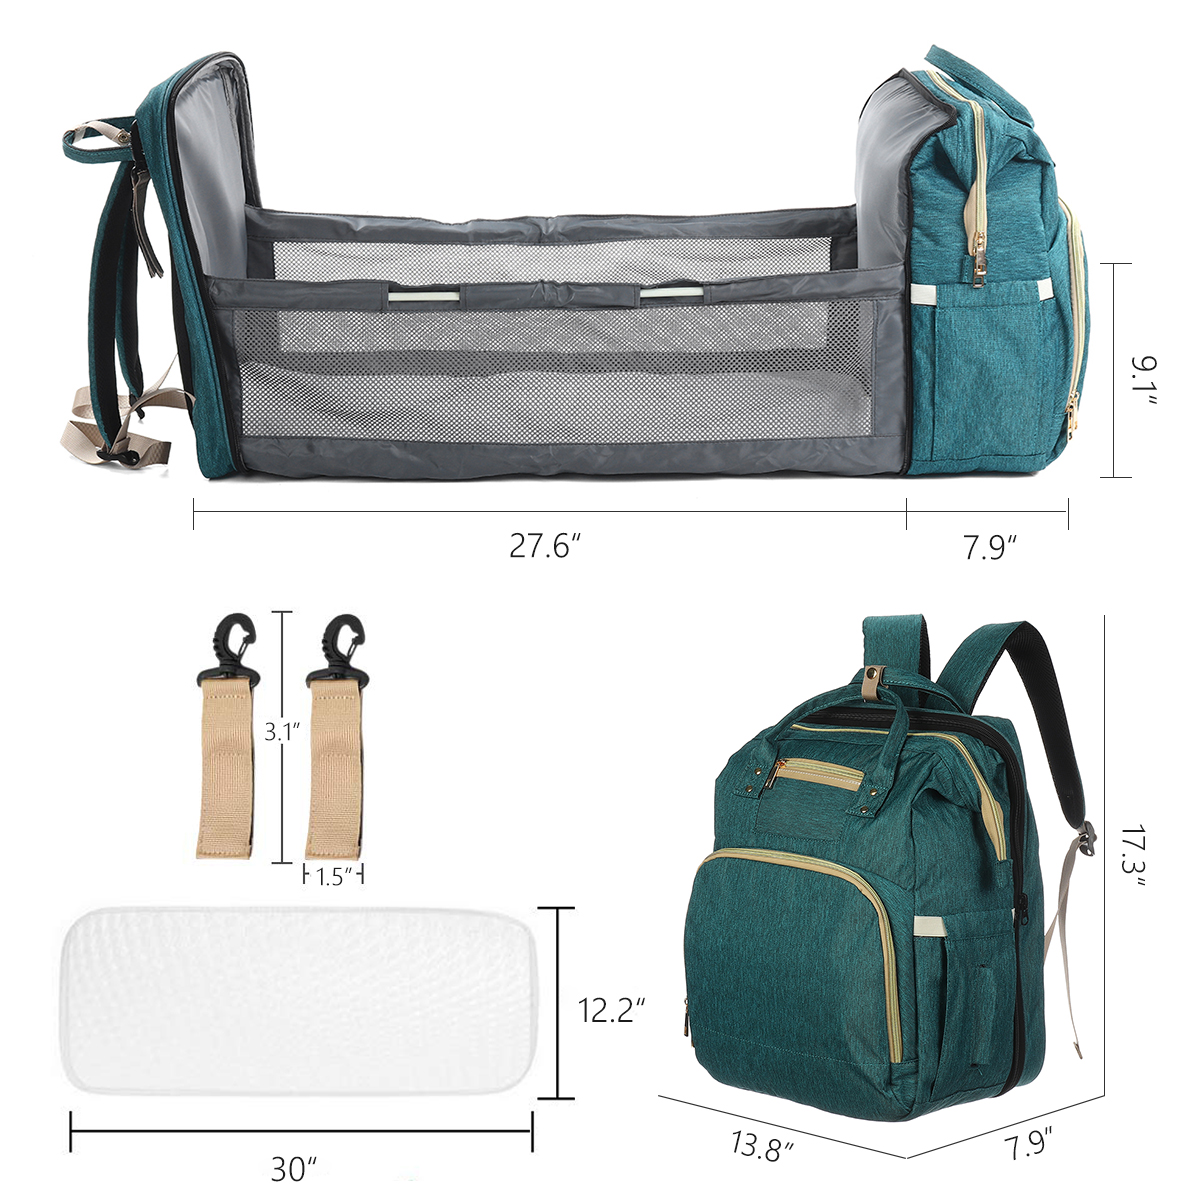 Multifunctional-Folding-Diaper-Bag-Waterproof-Baby-Sleep-Infant-Bed-Changing-Station-Outdoor-Travel--1810331-5